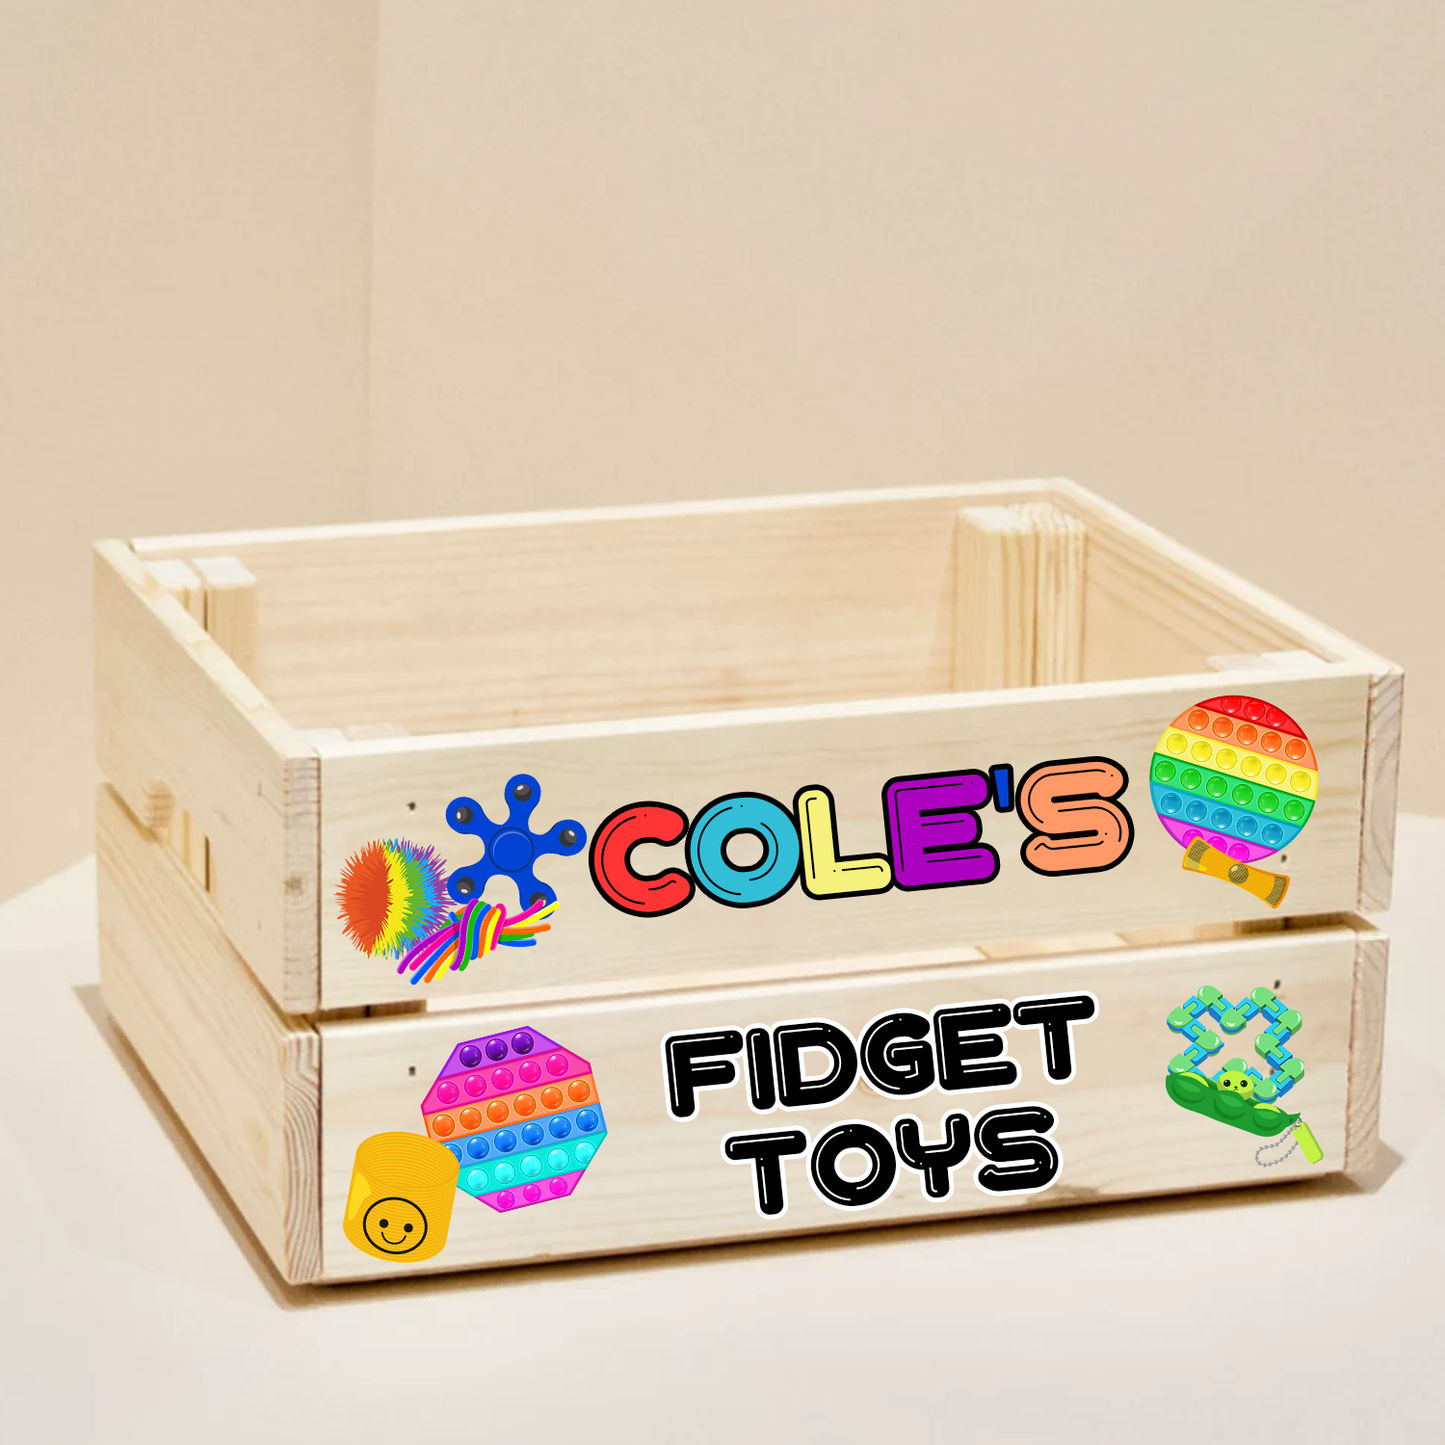 Personalised Fidgets / Sensory Toy  Wooden Crate - perfect storage solution for all their pop its & fidget gadgets!